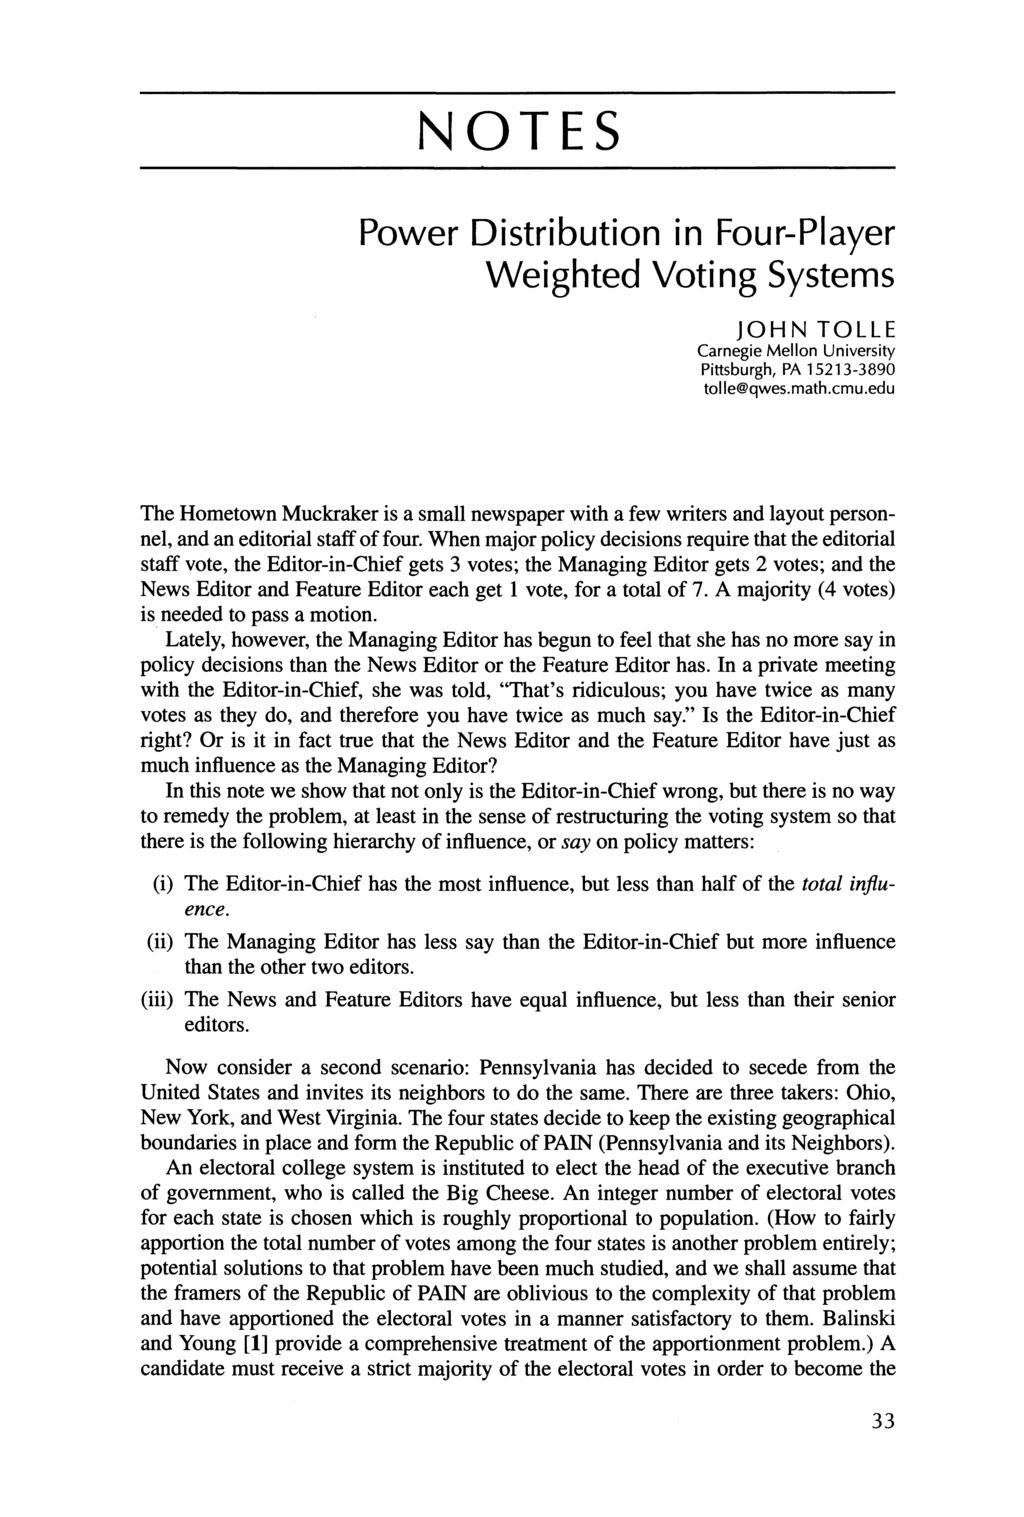 NOTES Power Distribution in Four-Player Weighted Voting Systems JOHN TOLLE Carnegie Mellon University Pittsburgh, PA 15213-3890 tolle@qwes,math.cmu.